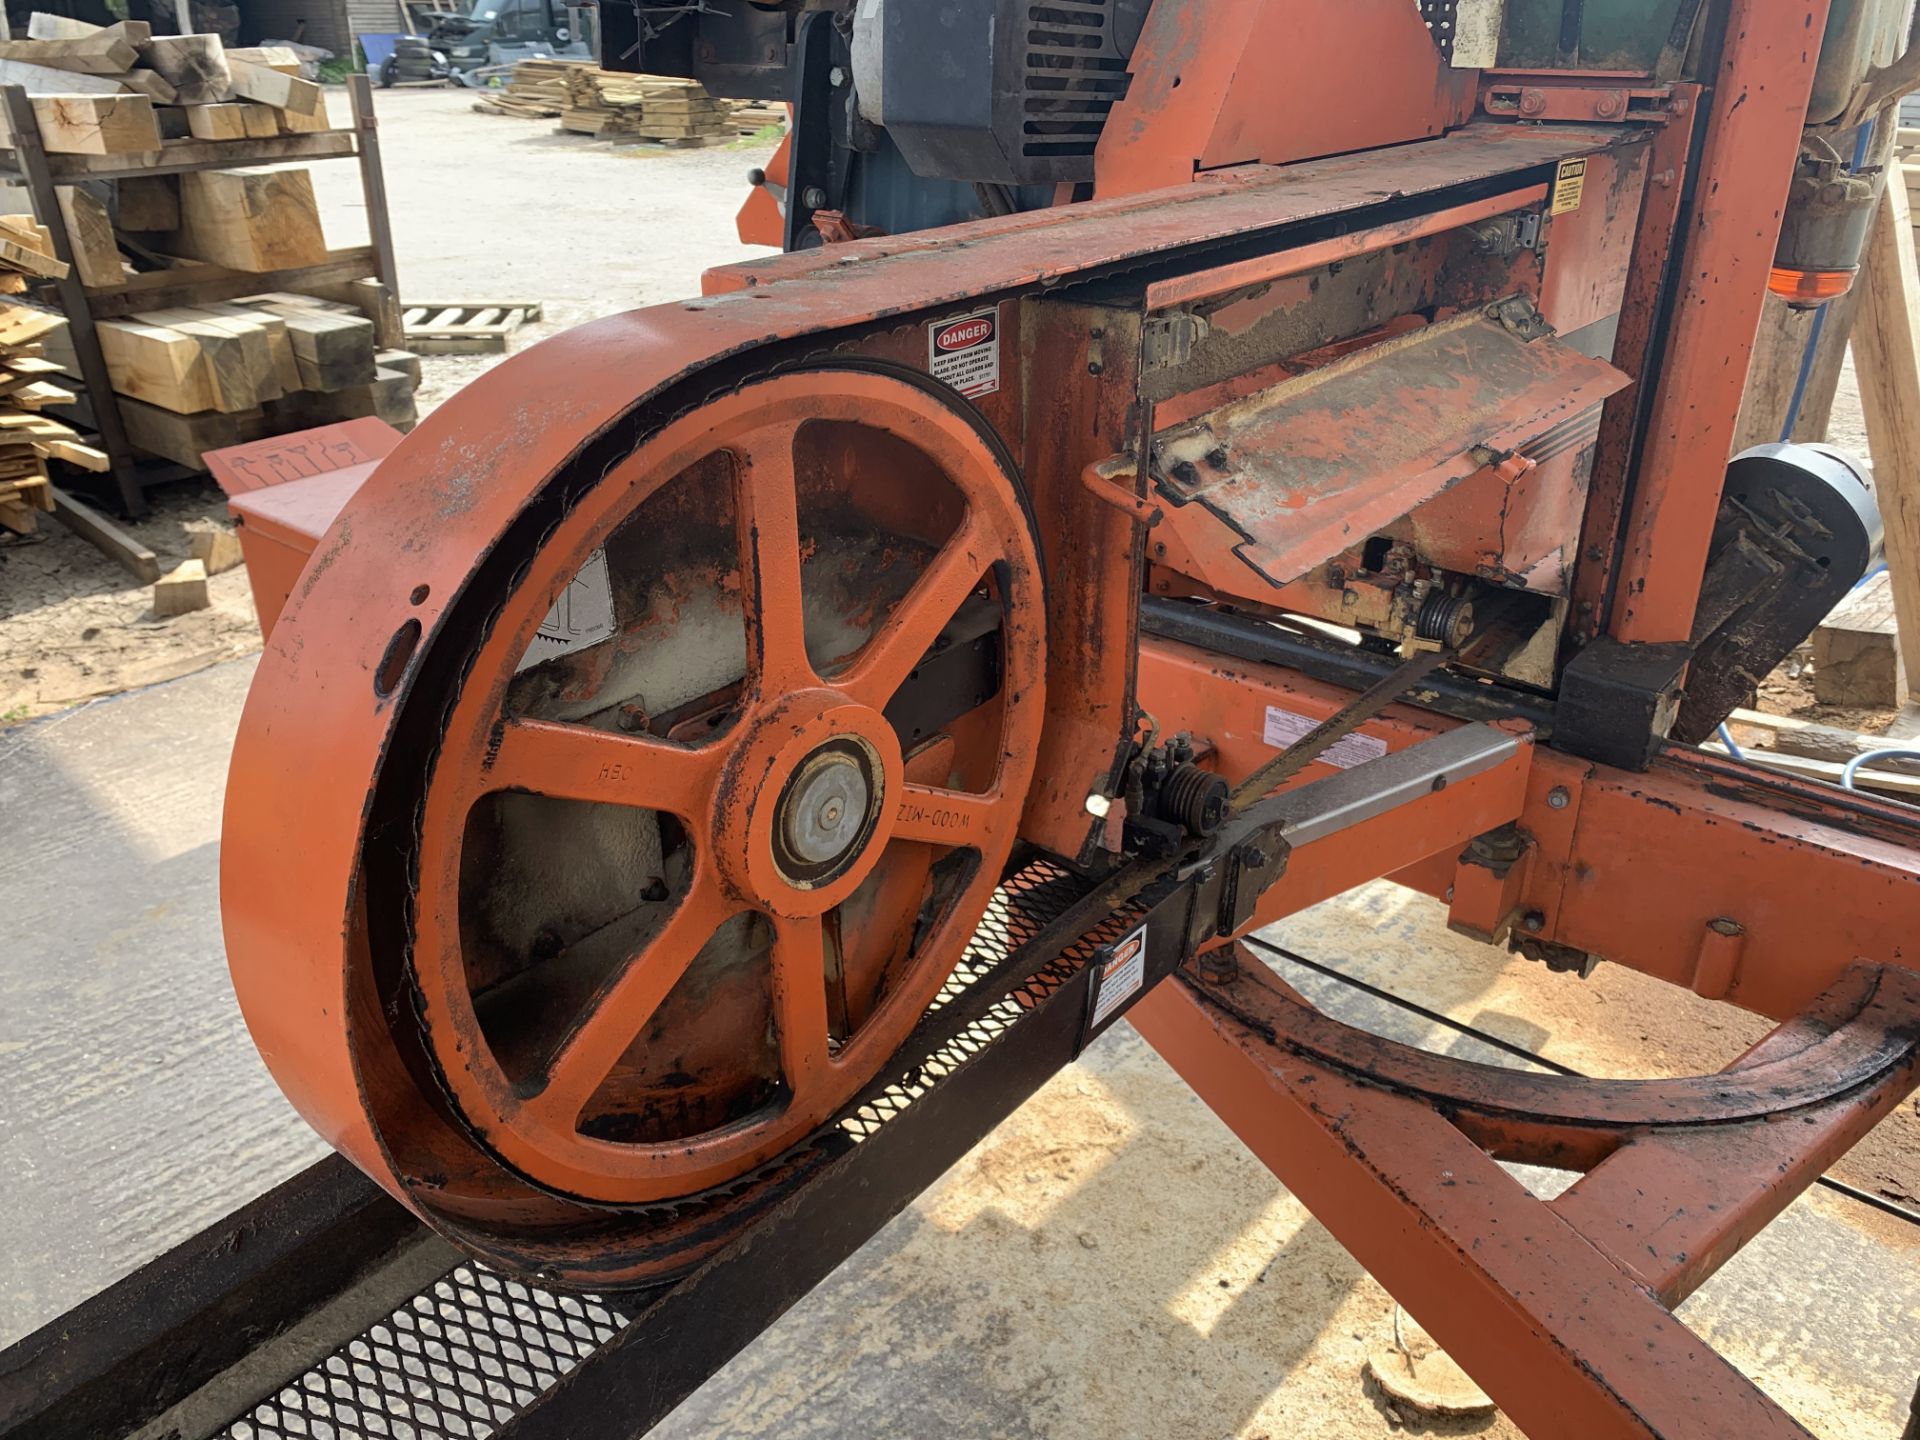 Wood-Mizer LT40MD335DH PORTABLE SAW MILL, serial no 456c42417EPHE1464 (27/08/07), 2378 hours, SW- - Image 7 of 12